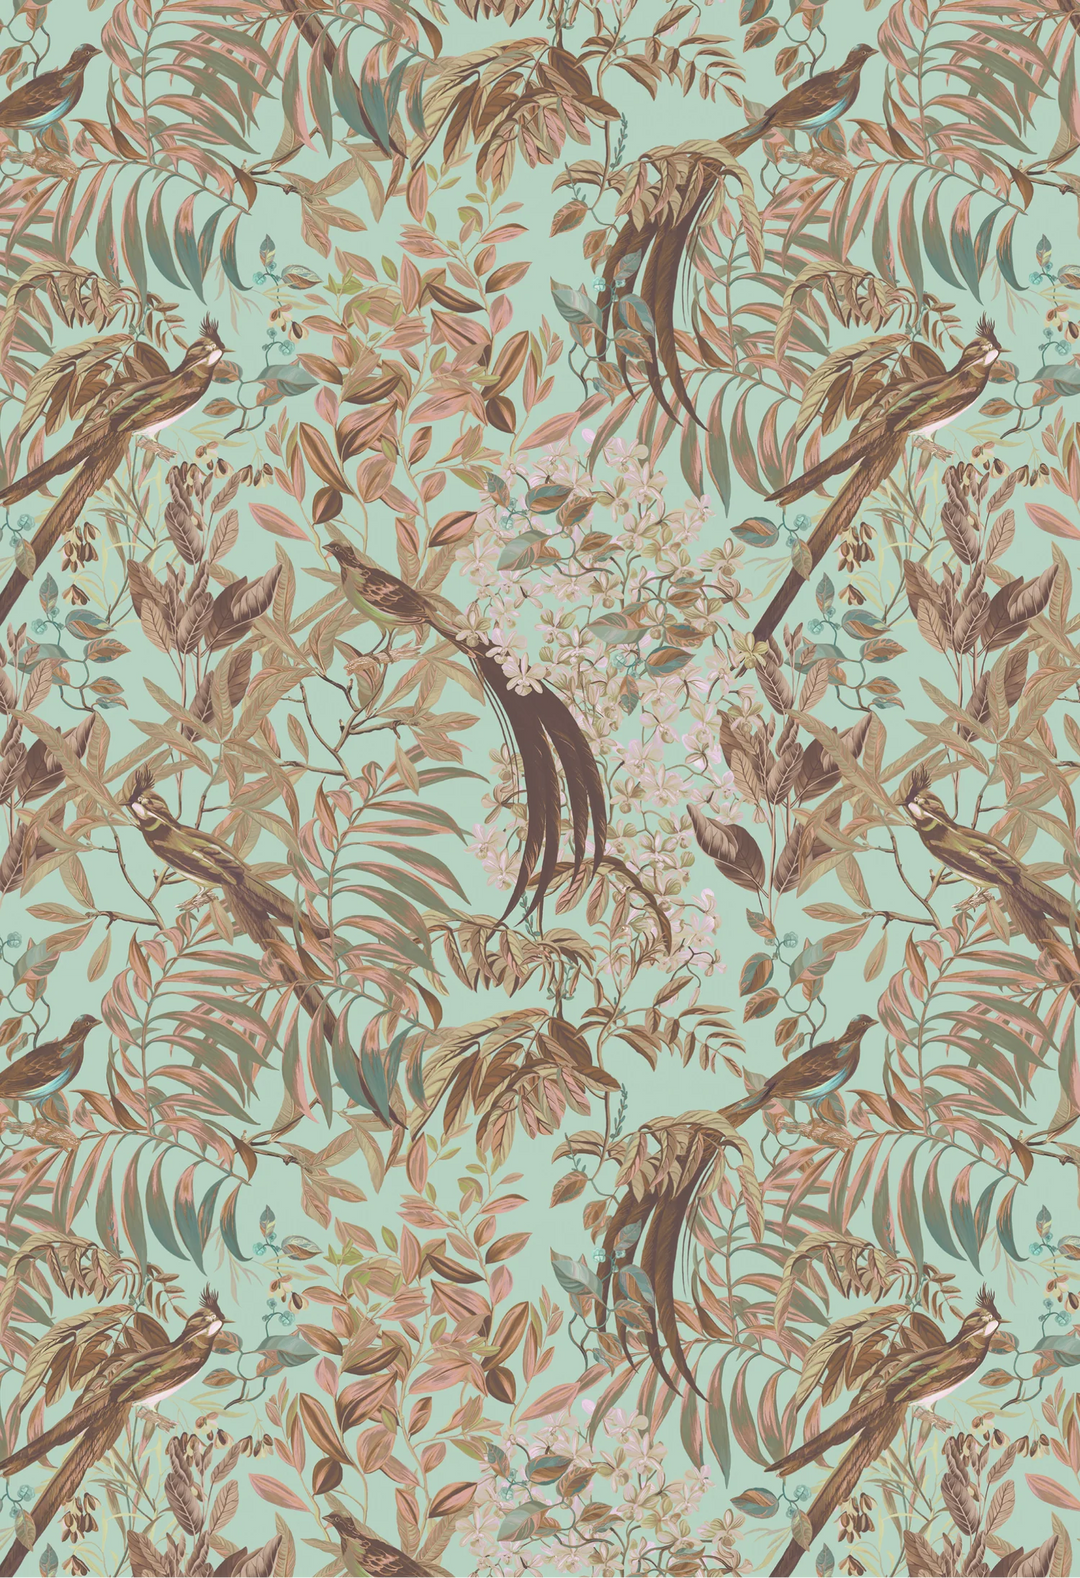 Deus-ex-gardenia-resplendant-woods-wallpaper-forest-beautiful-tropical-birds0rich-tones-feathers-botanical-woodland-colours-hand-illustrated-print-Teal-soft-green-background-colour